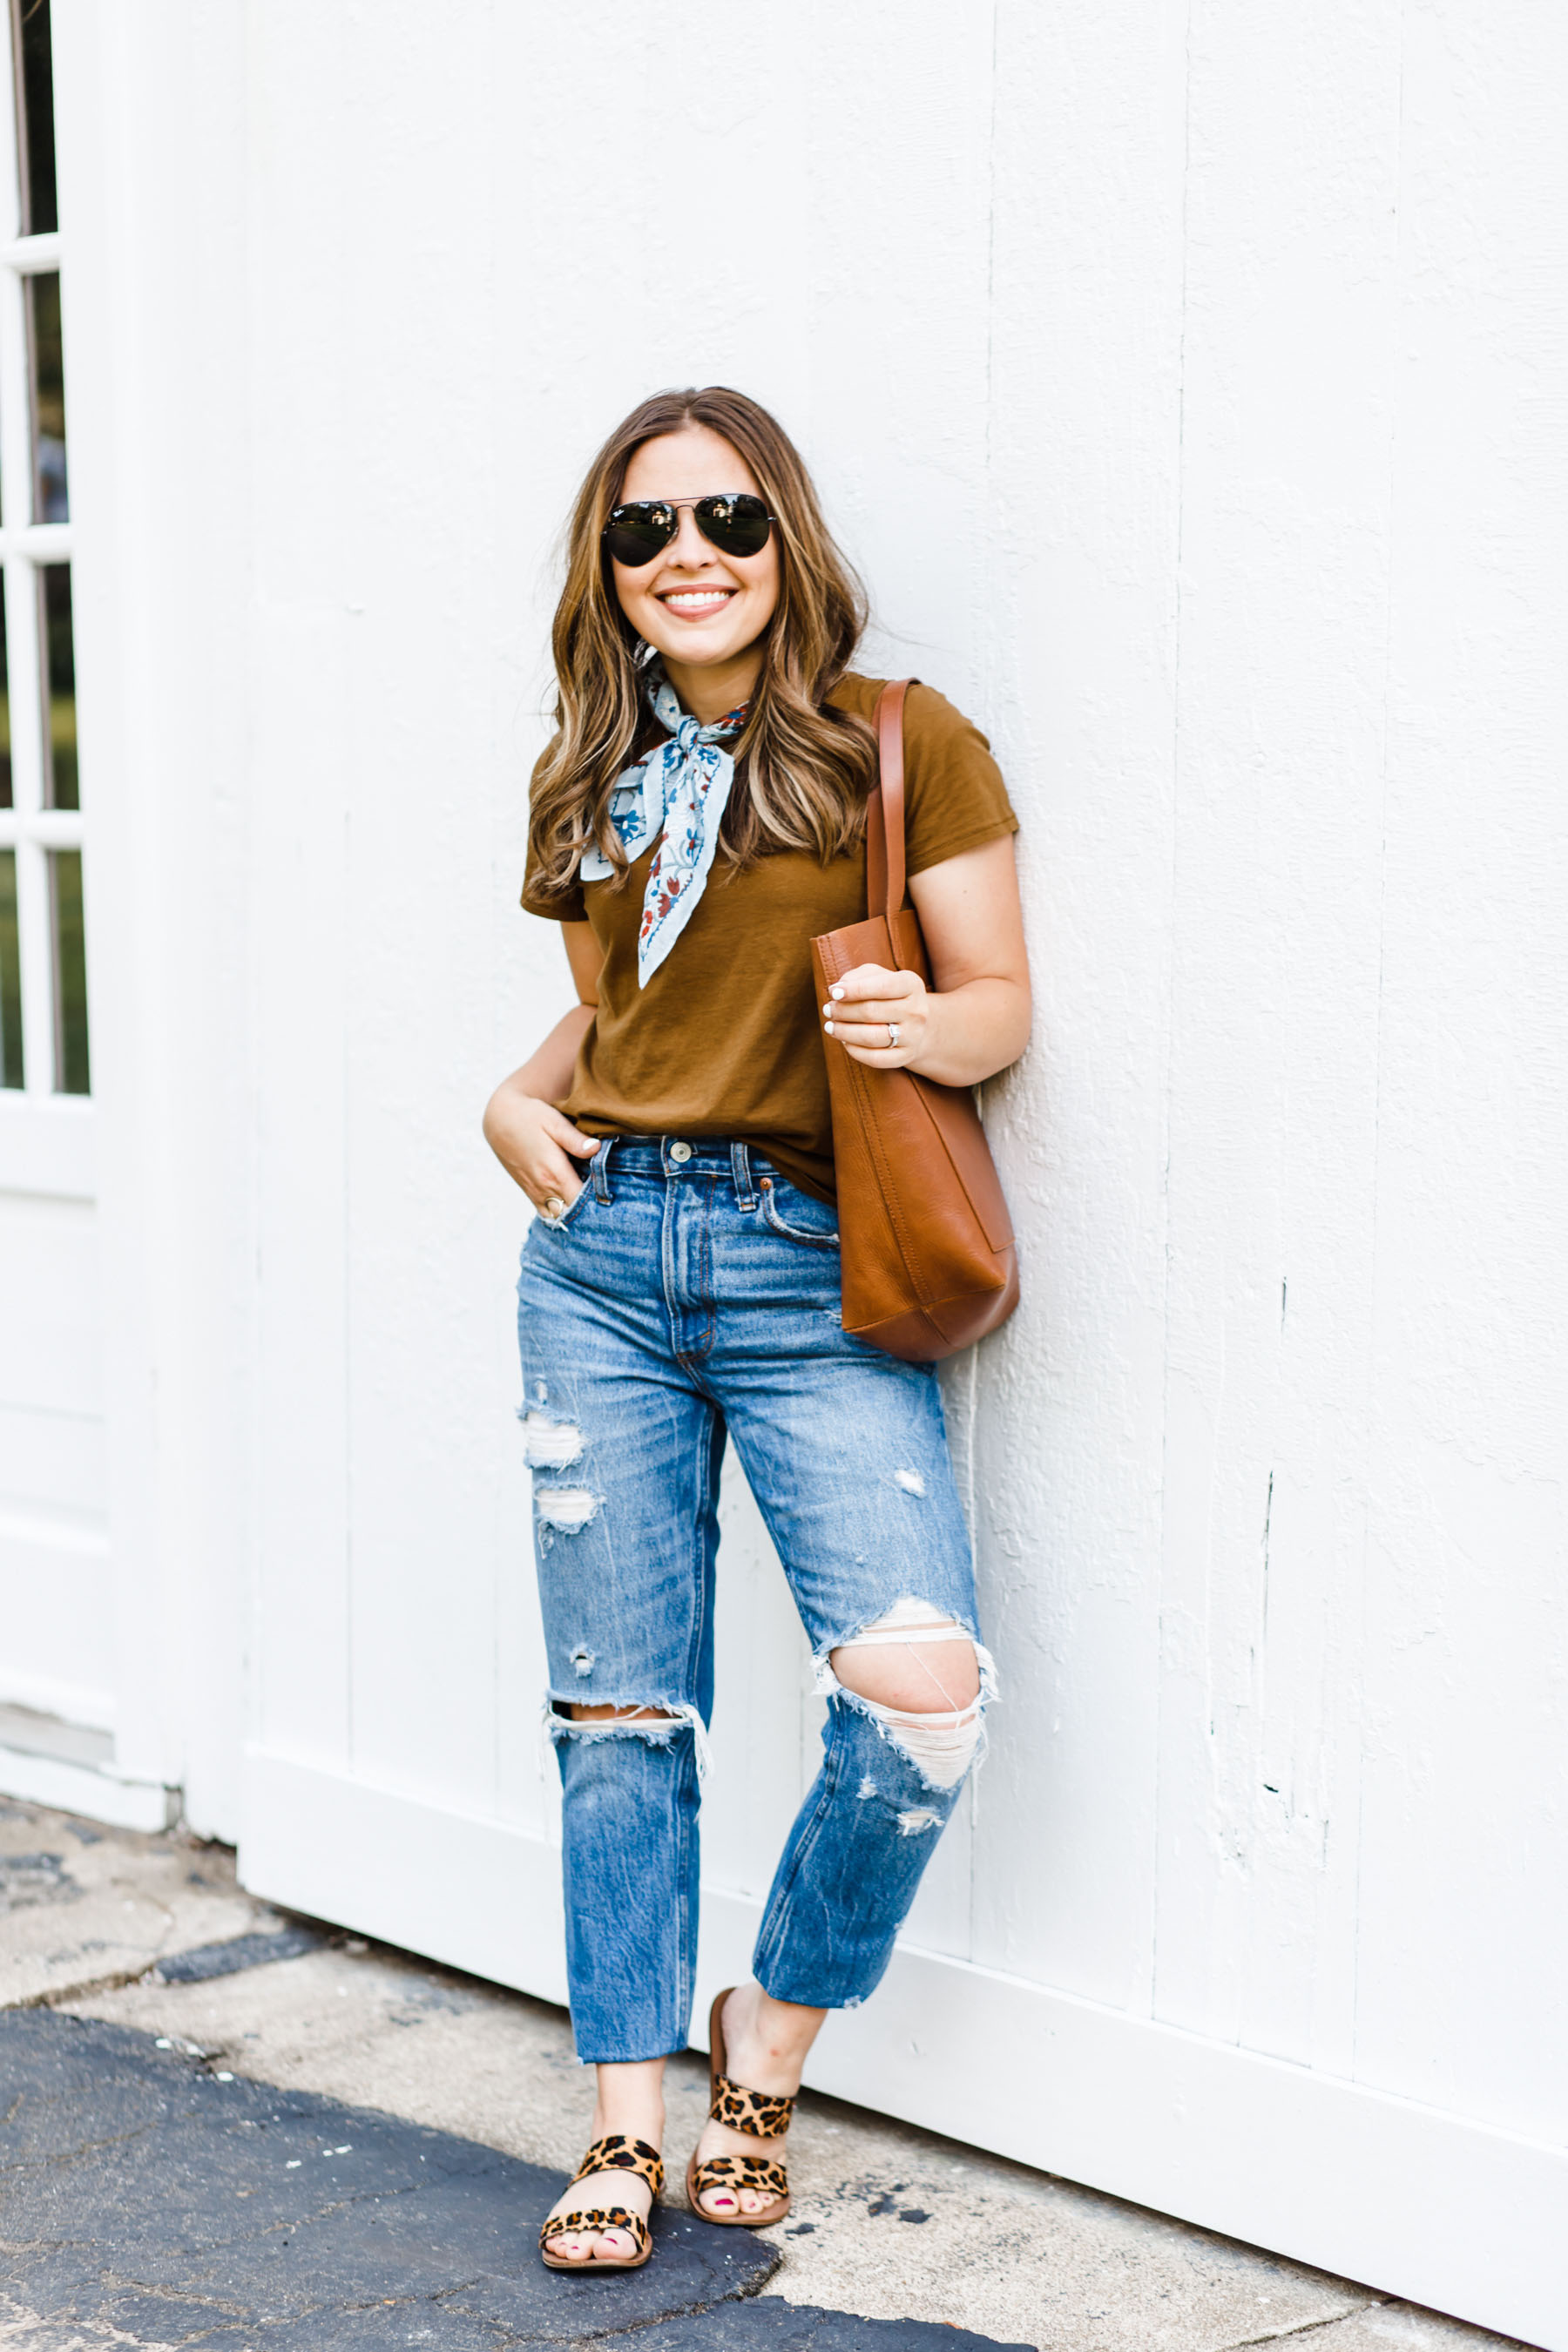 4 tips for getting out of a summer style funk. - dress cori lynn